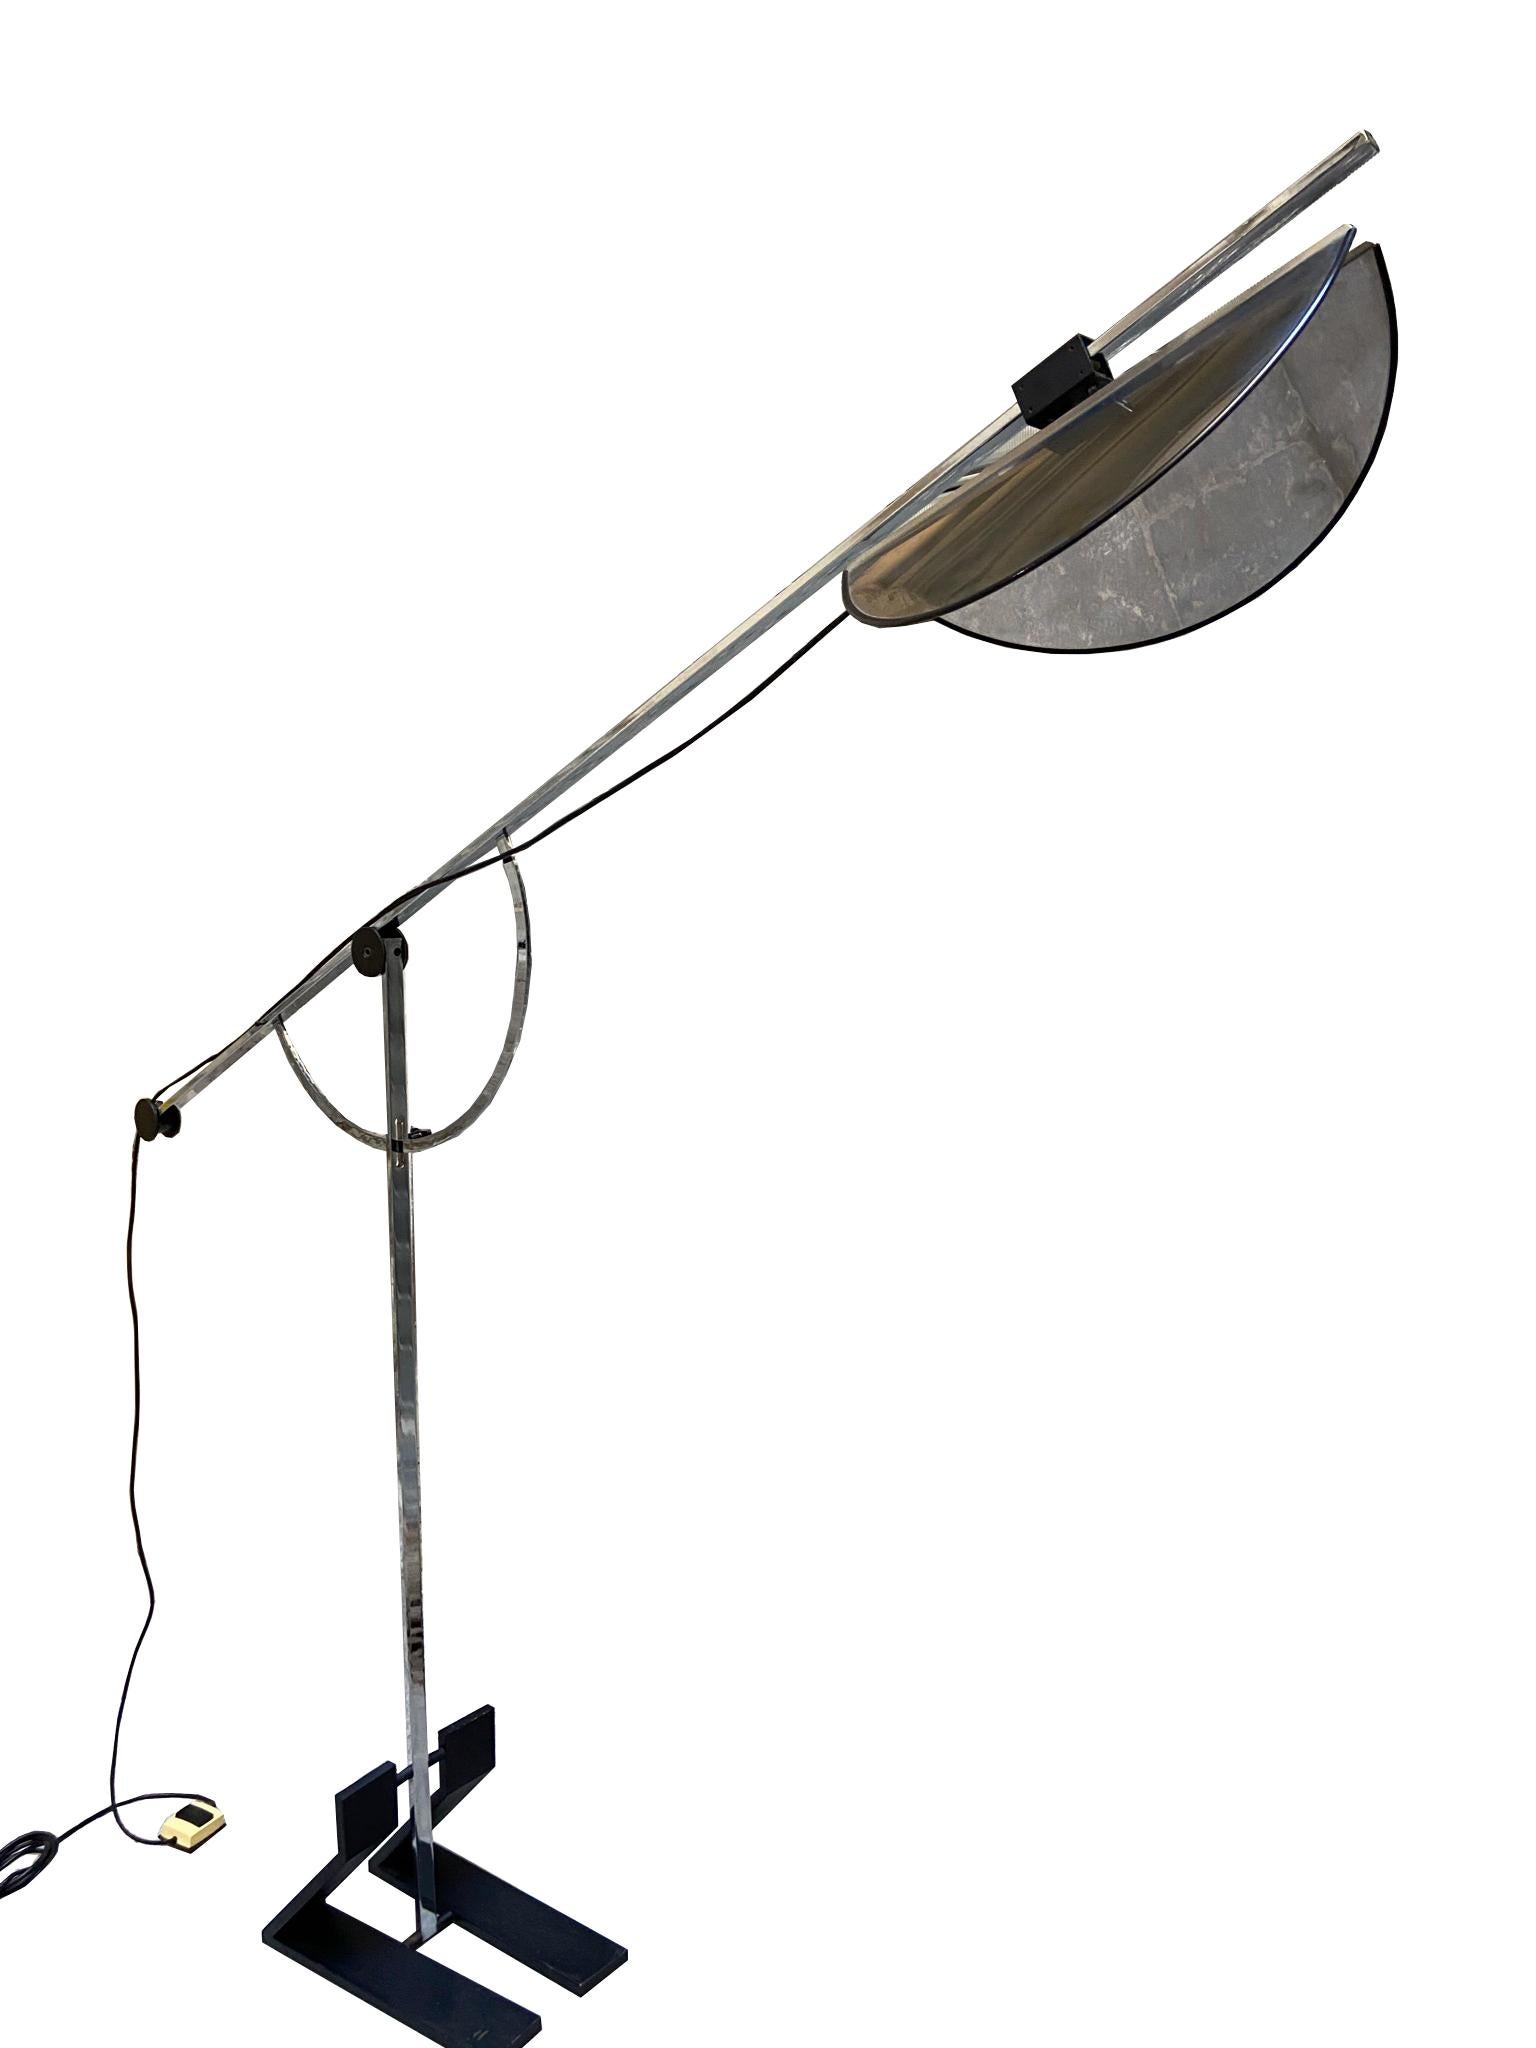 Fabulous chrome floor lamp with adjustable arm and mirror shade.